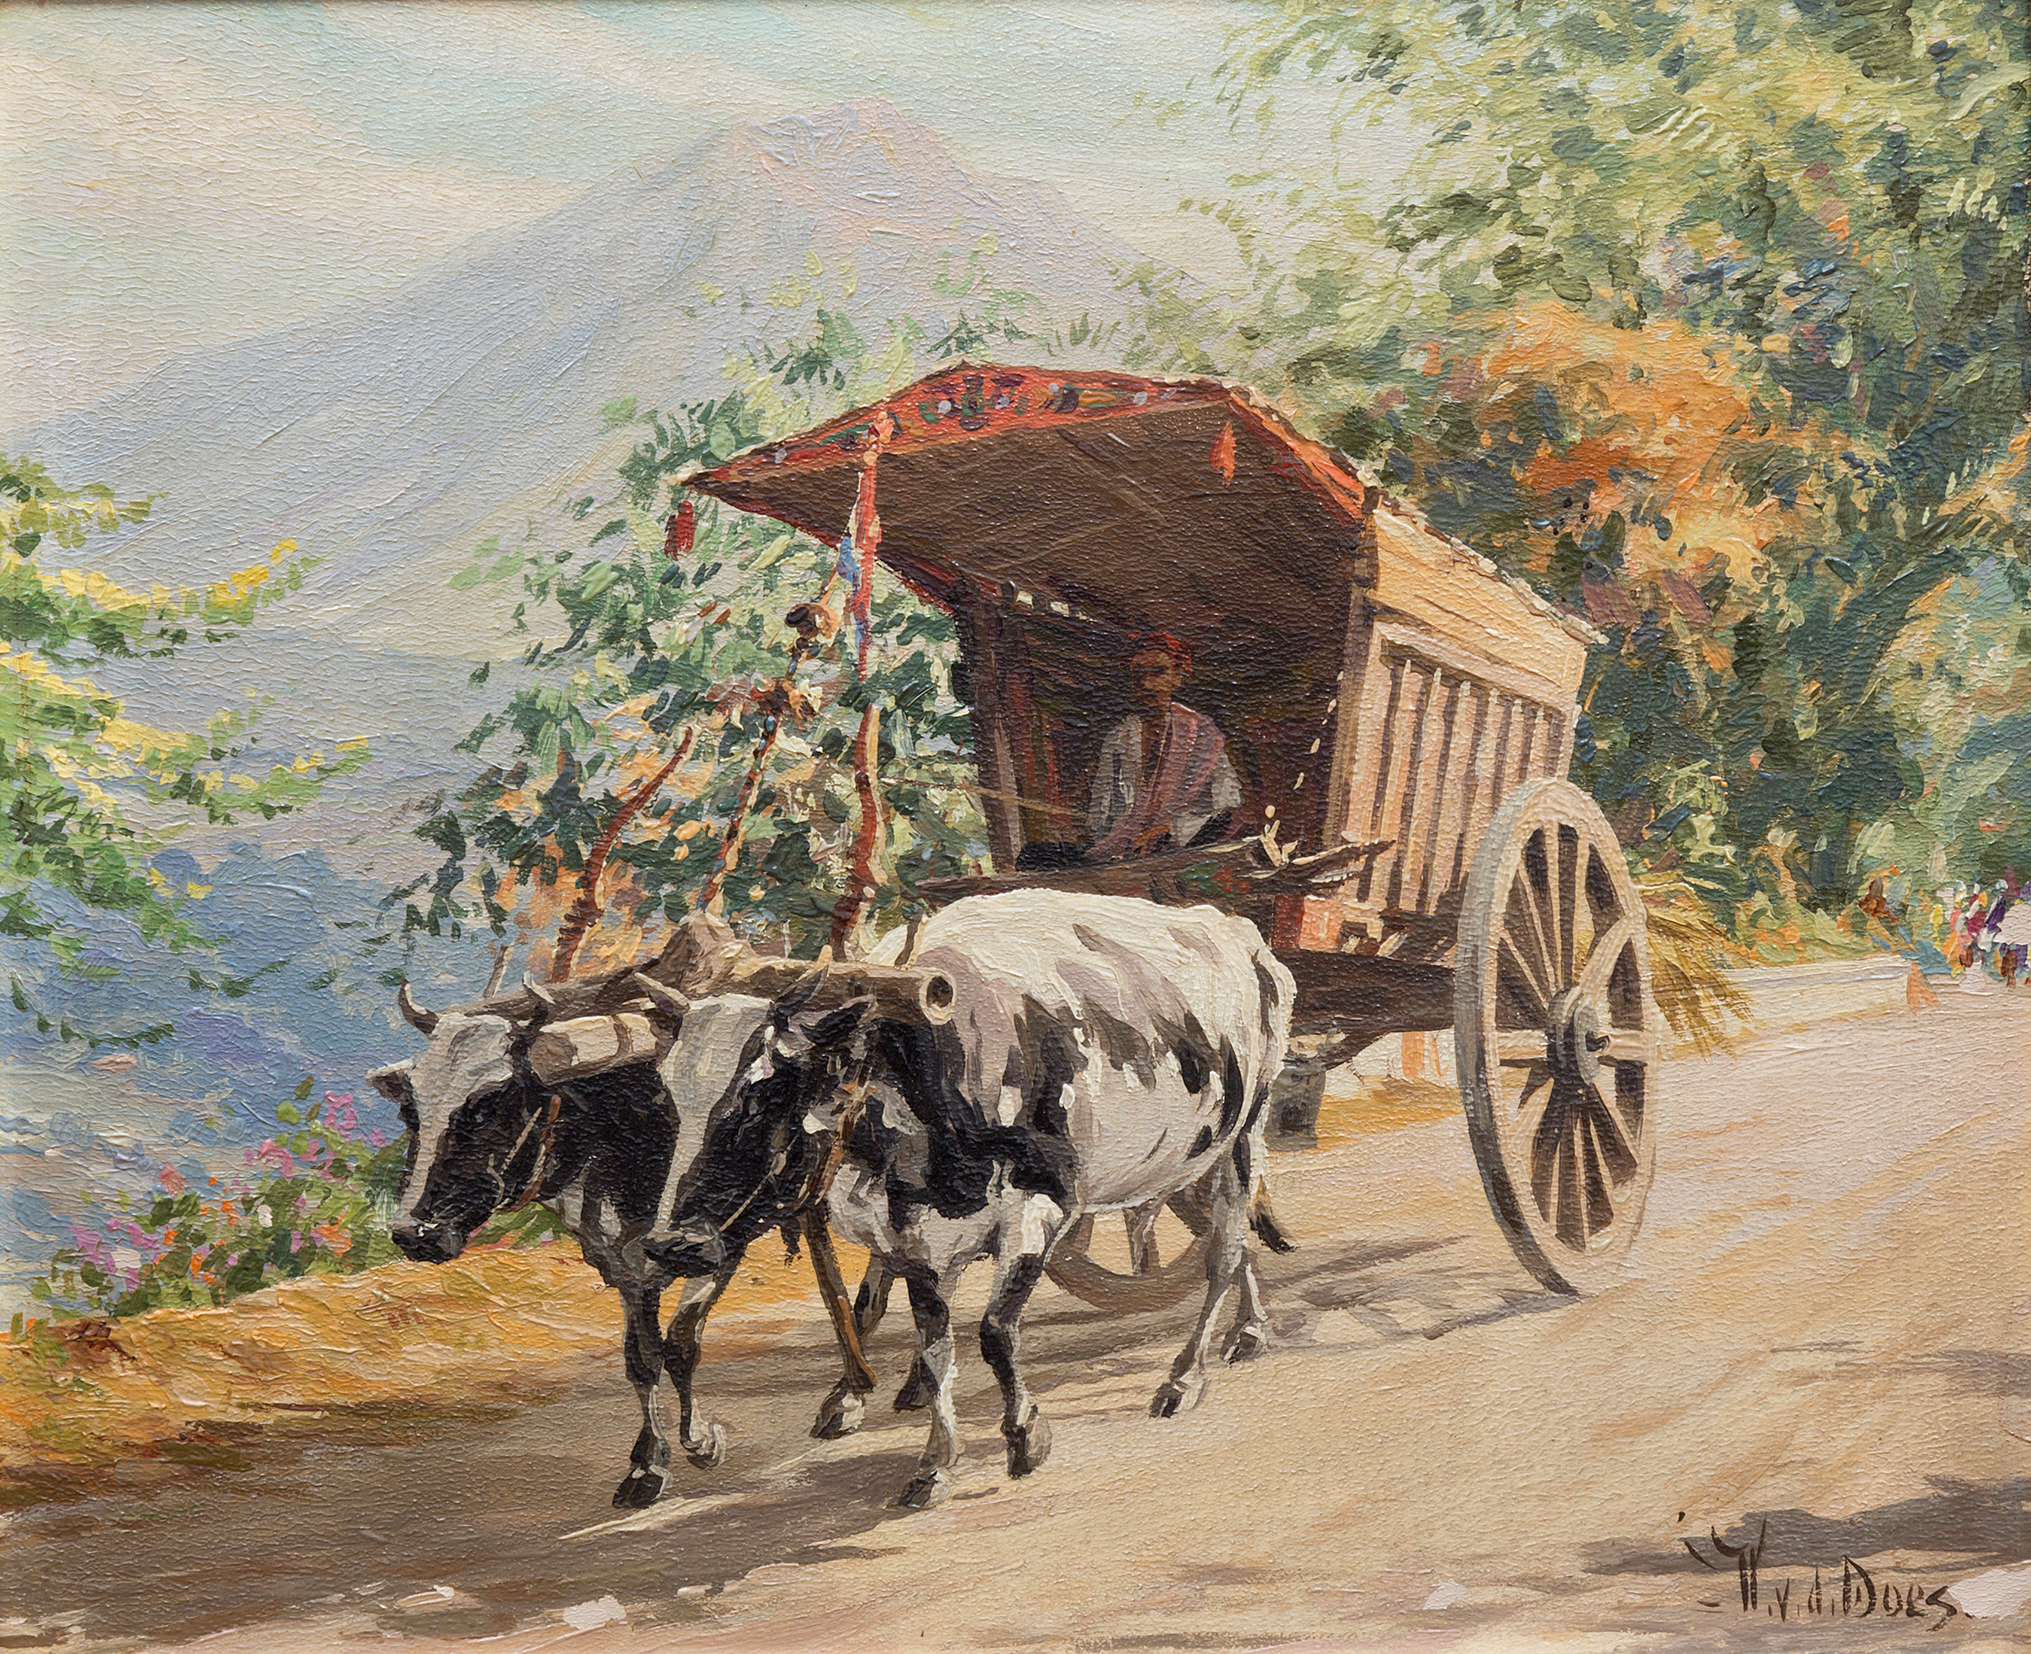 Ox cart in Indonesian landscape